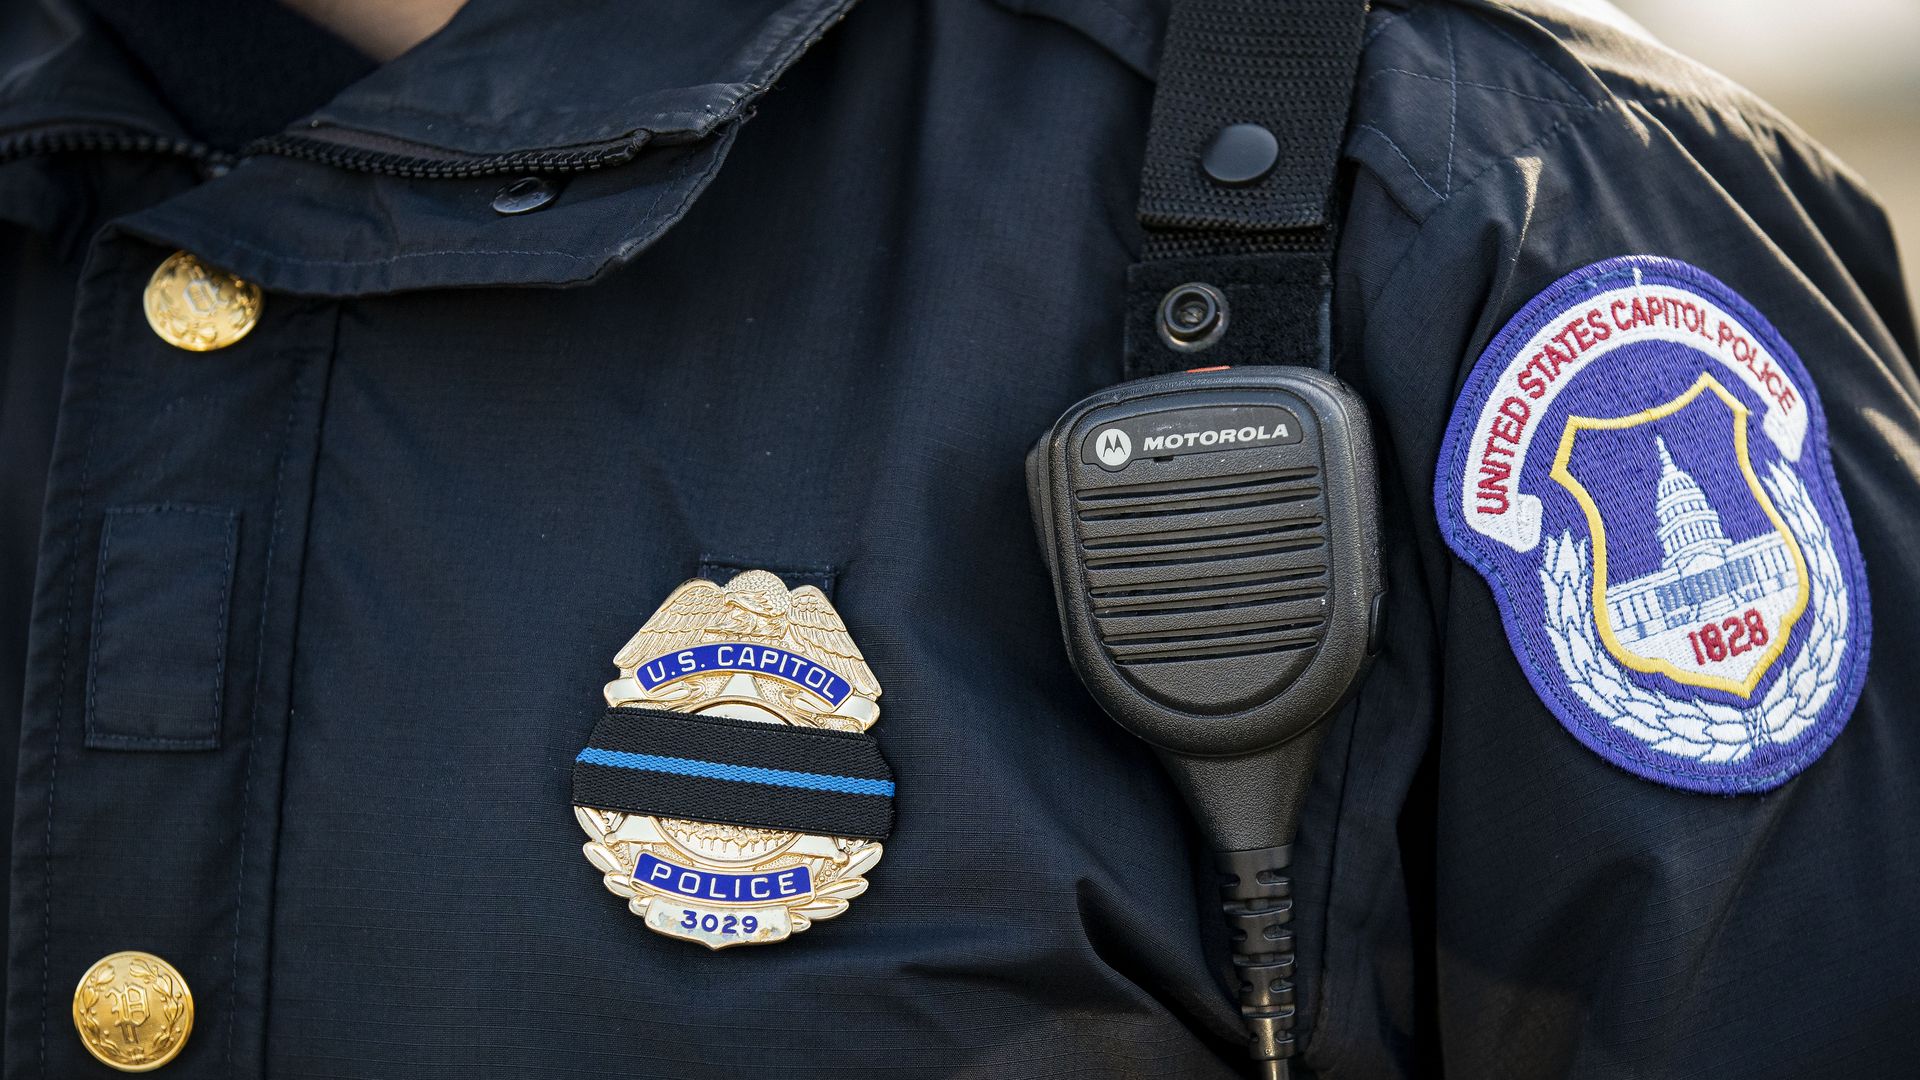 A mourning band is seen on the badge of a U.S. Capitol Police officer.